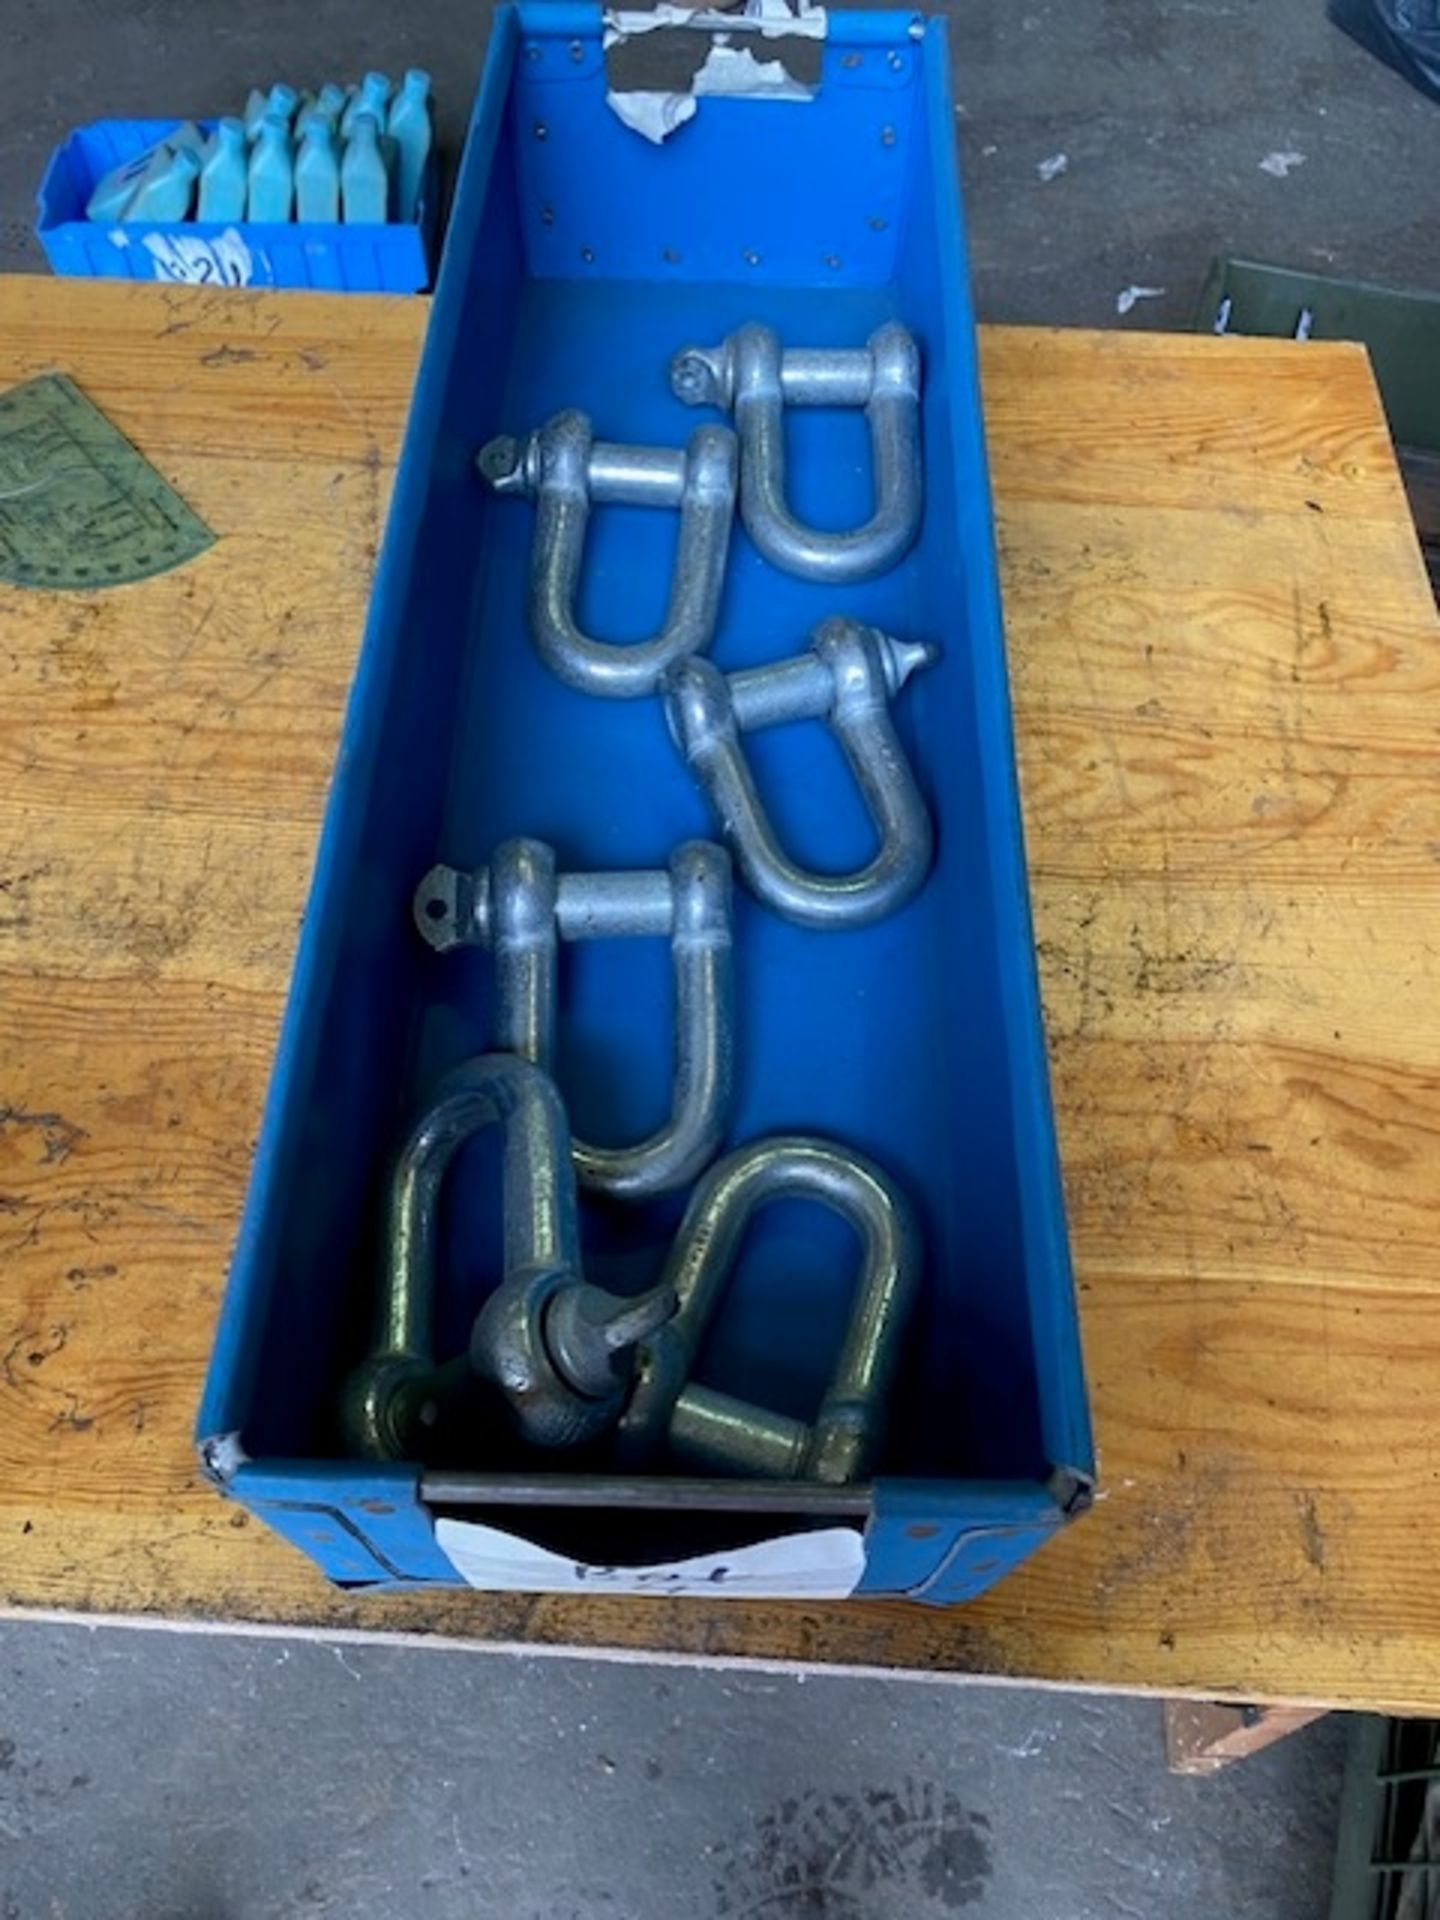 6x New Unissued 2.25 ton Recovery D Shackles